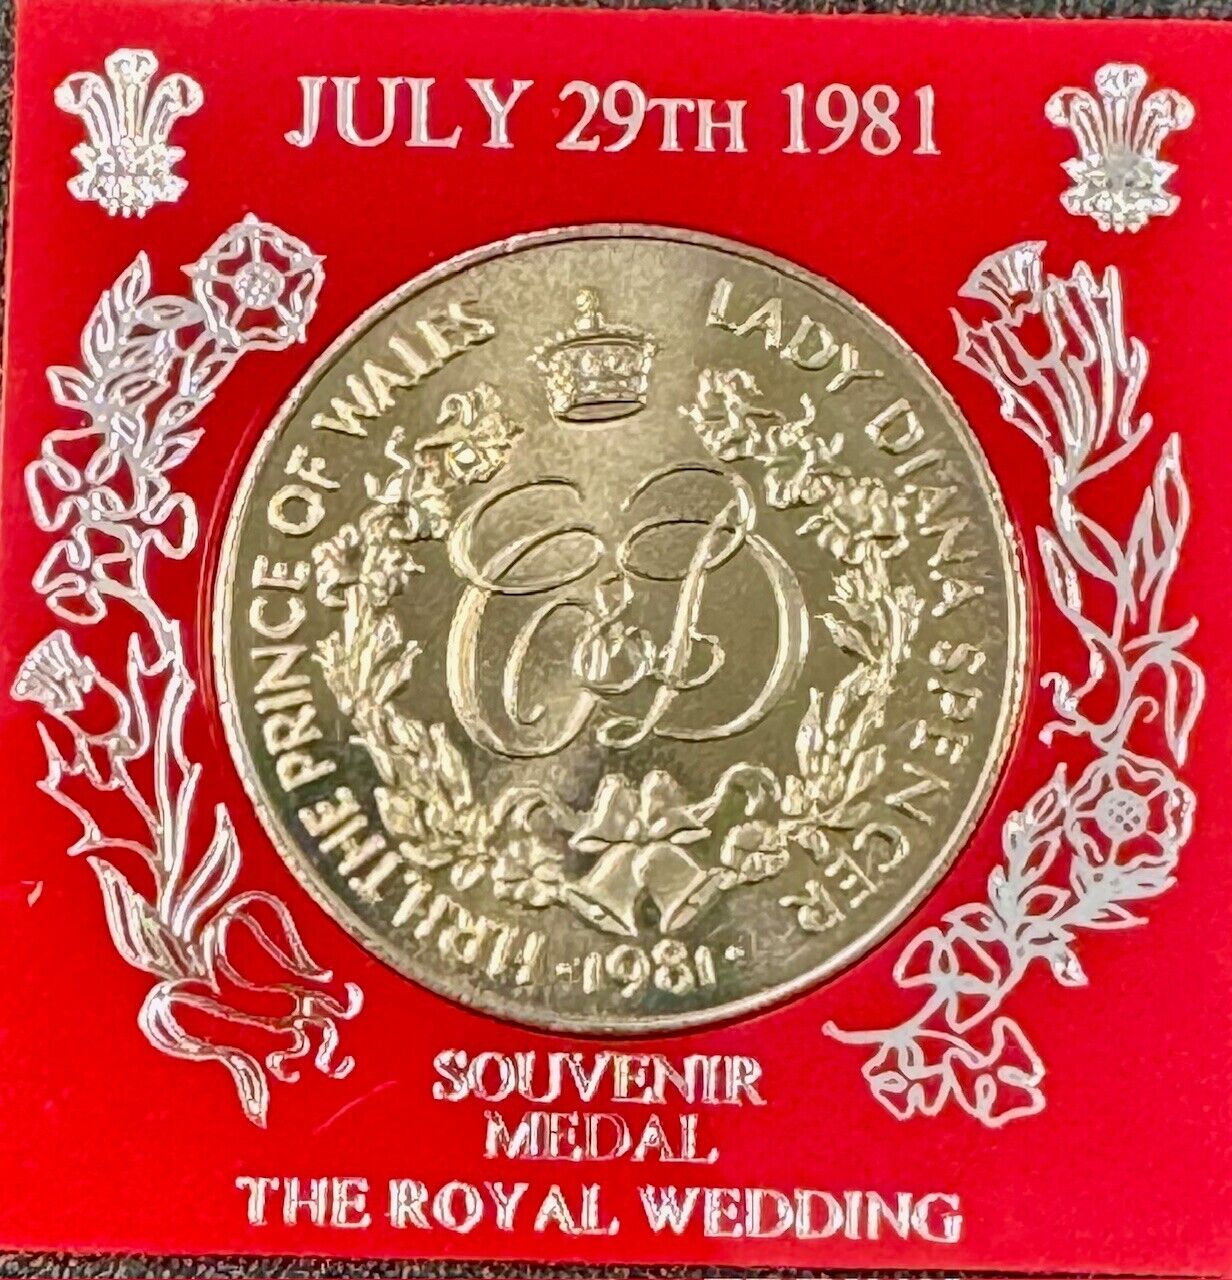 1981 Royal Wedding Souvenir Coin Medal in Red Case July 29th Diana Charles